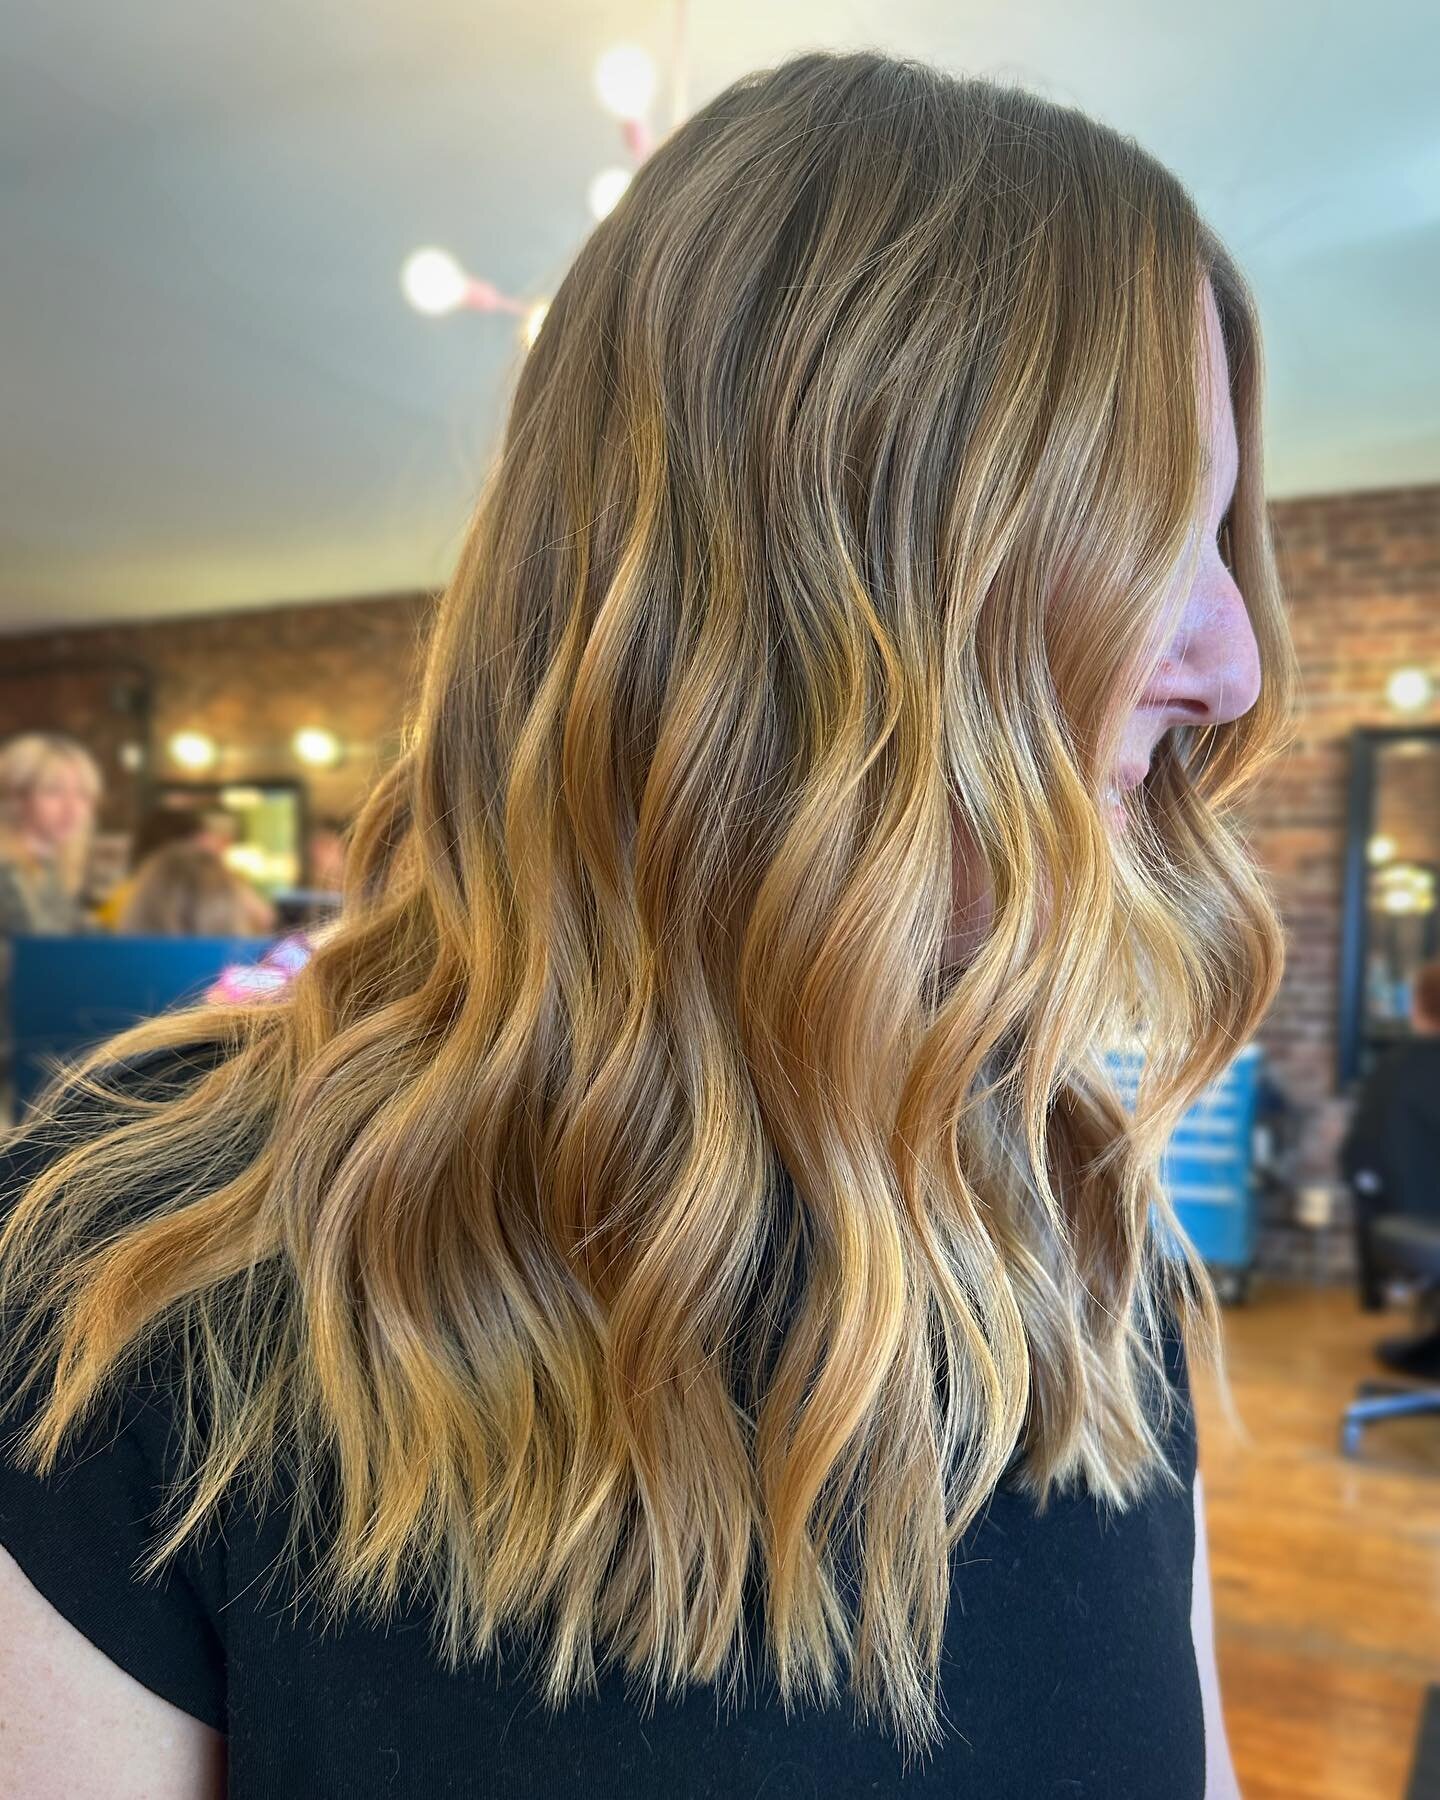 Copper blonde balayage. One of my faves for summer and spring. ☀️

#chachasalon #lex #lexky #lexingtonky #lexingtonhairstylist #lexingtonhairstylist #kyhair #kyhairstylist #universityofkentucky